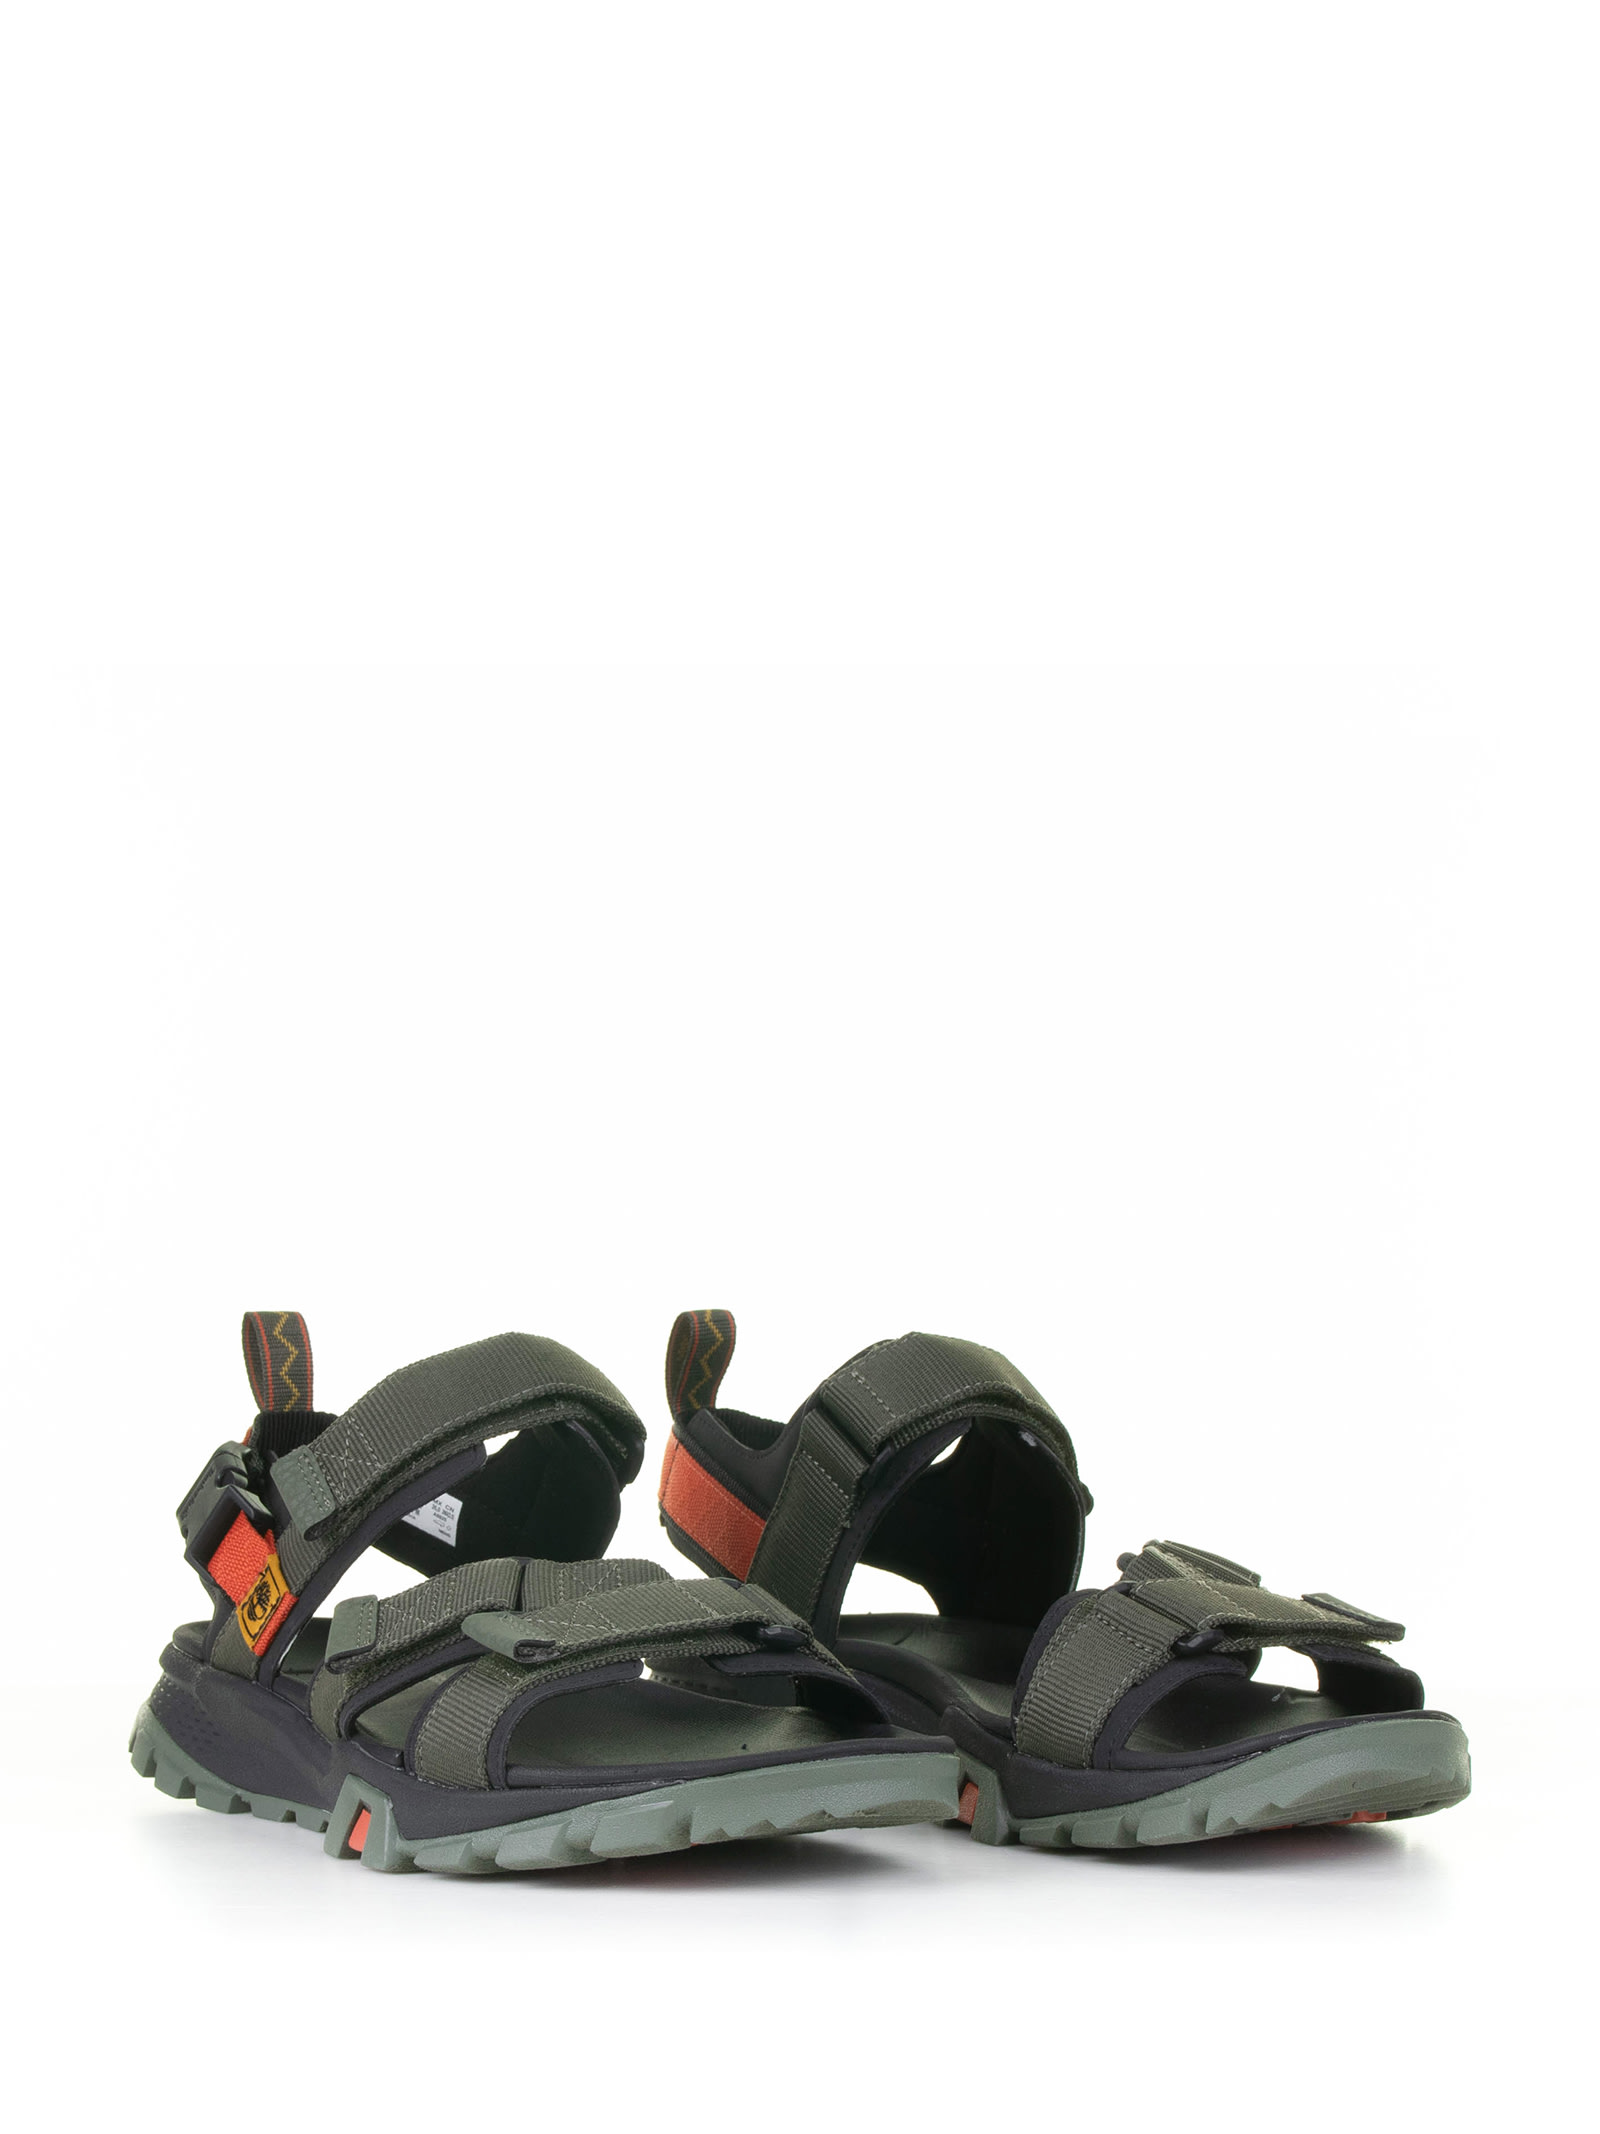 Shop Timberland Sandals With Adjustable Velcro Straps In Leaf Green